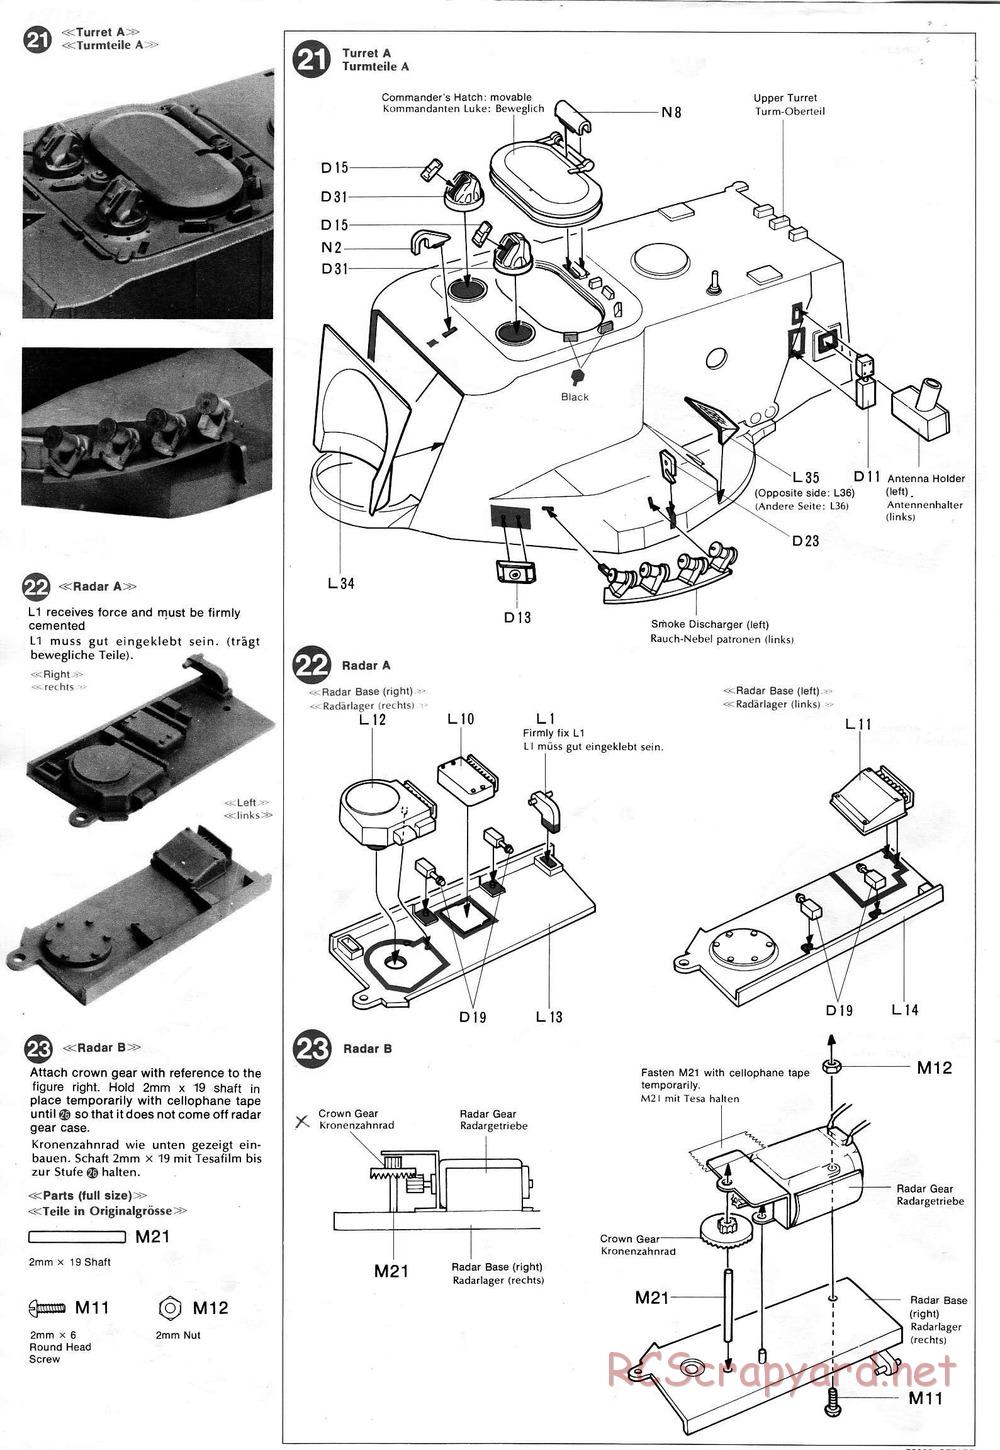 Tamiya - Flakpanzer Gepard - 1/16 Scale Chassis - Manual - Page 10